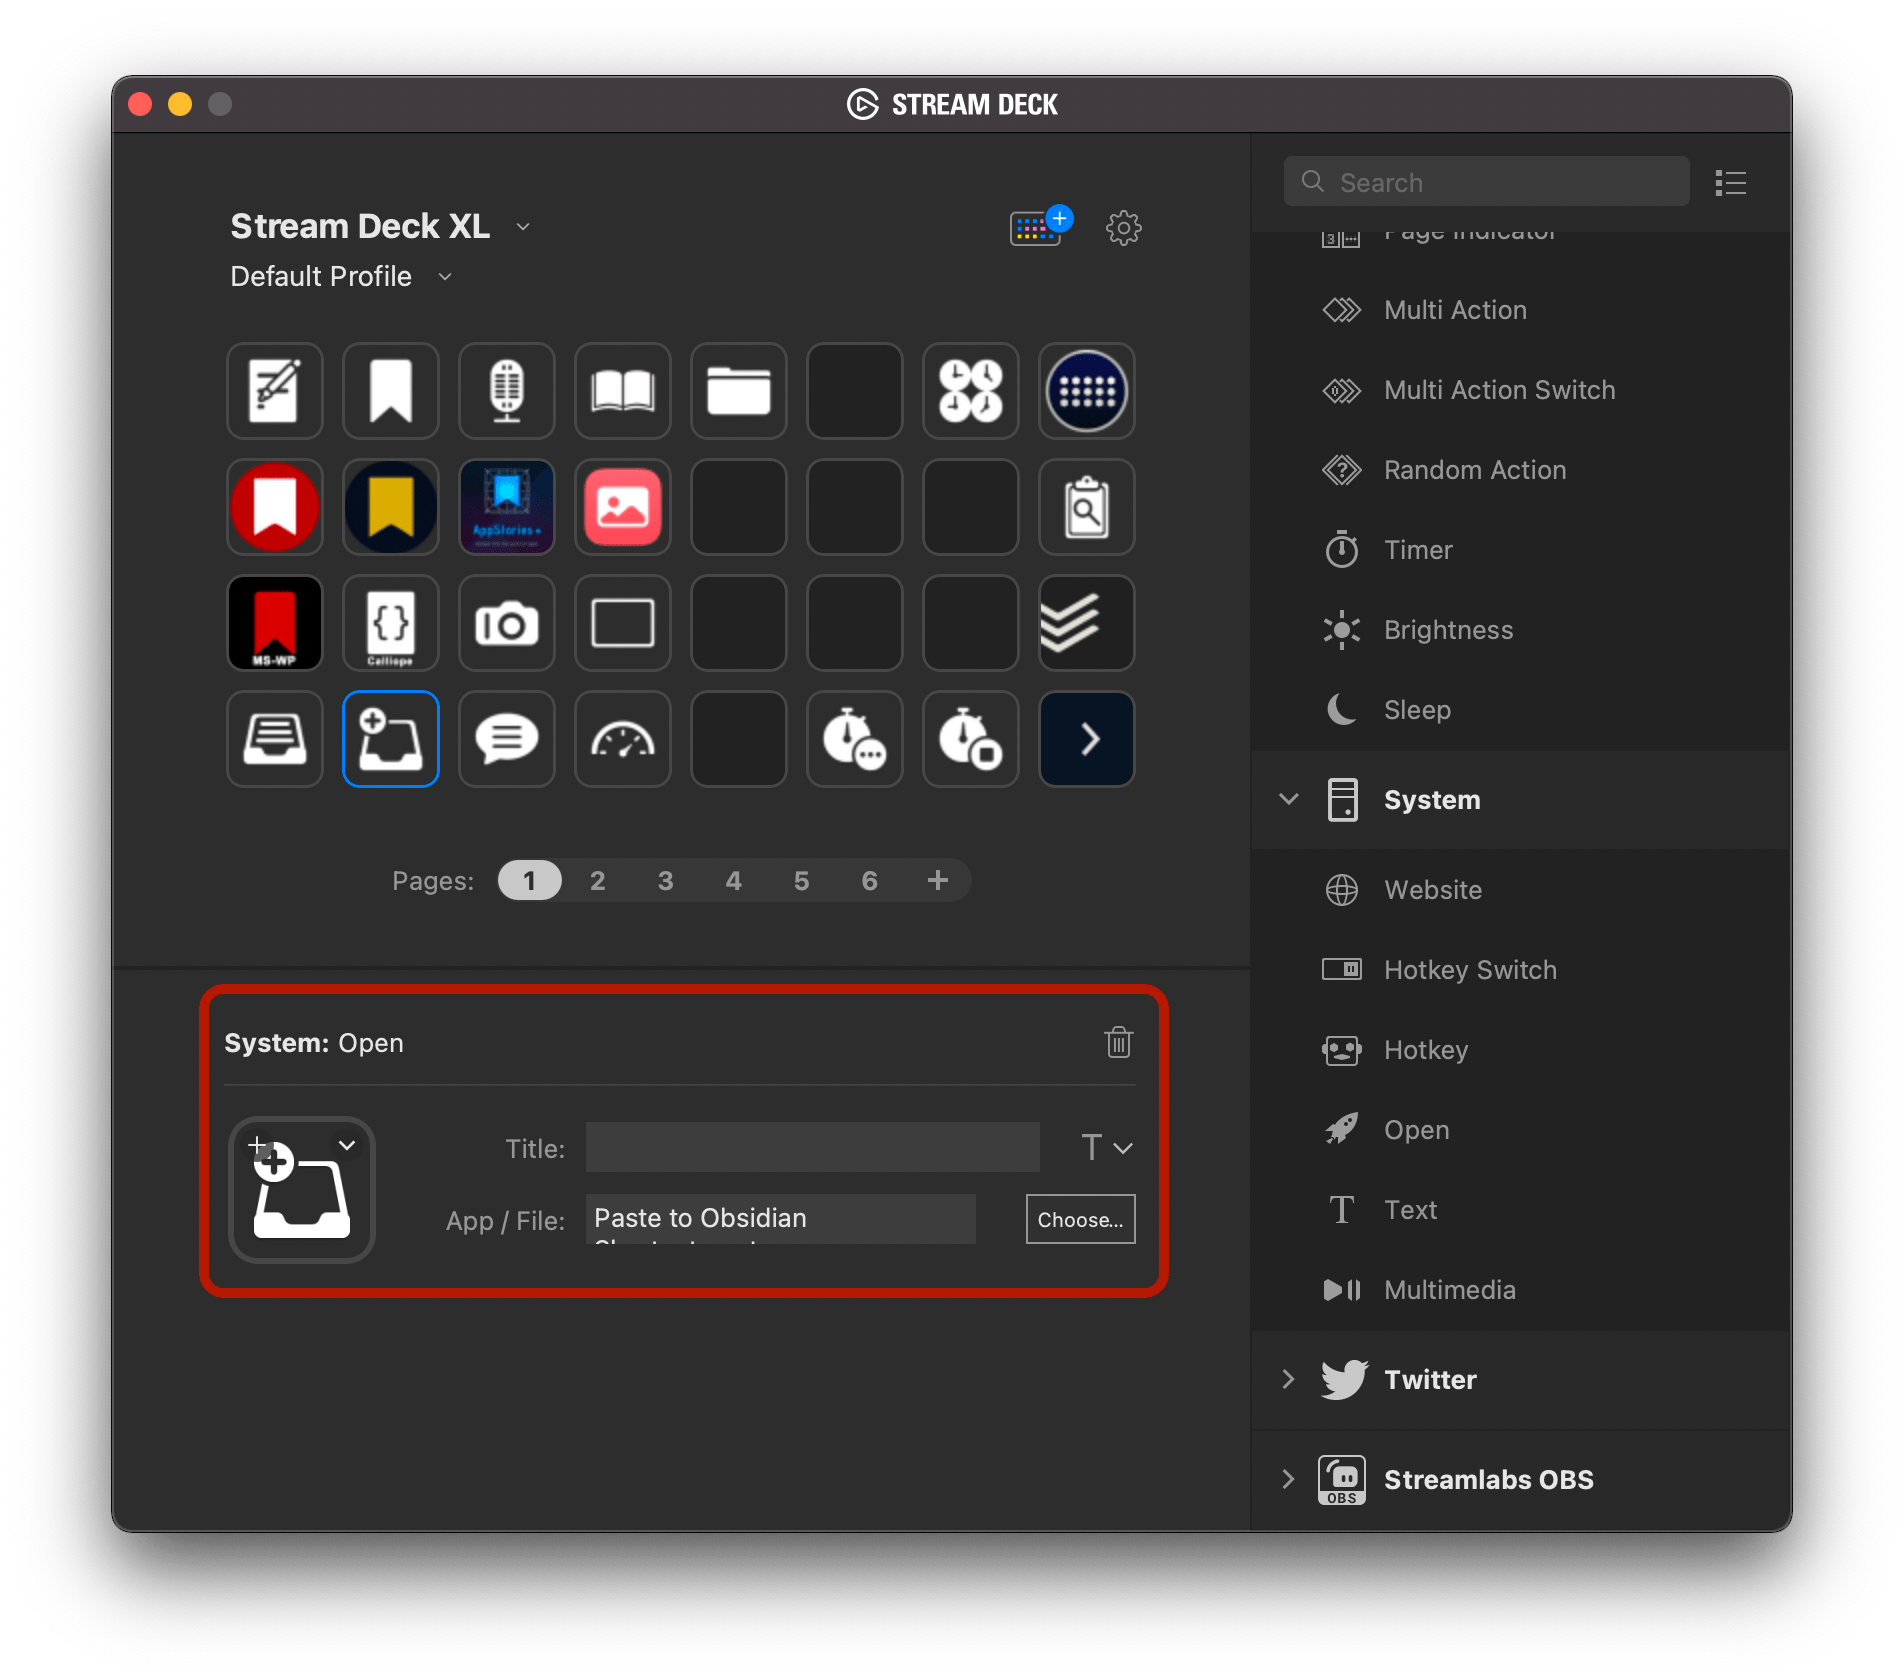 Using the Stream Deck's Open action to trigger a shortcut.